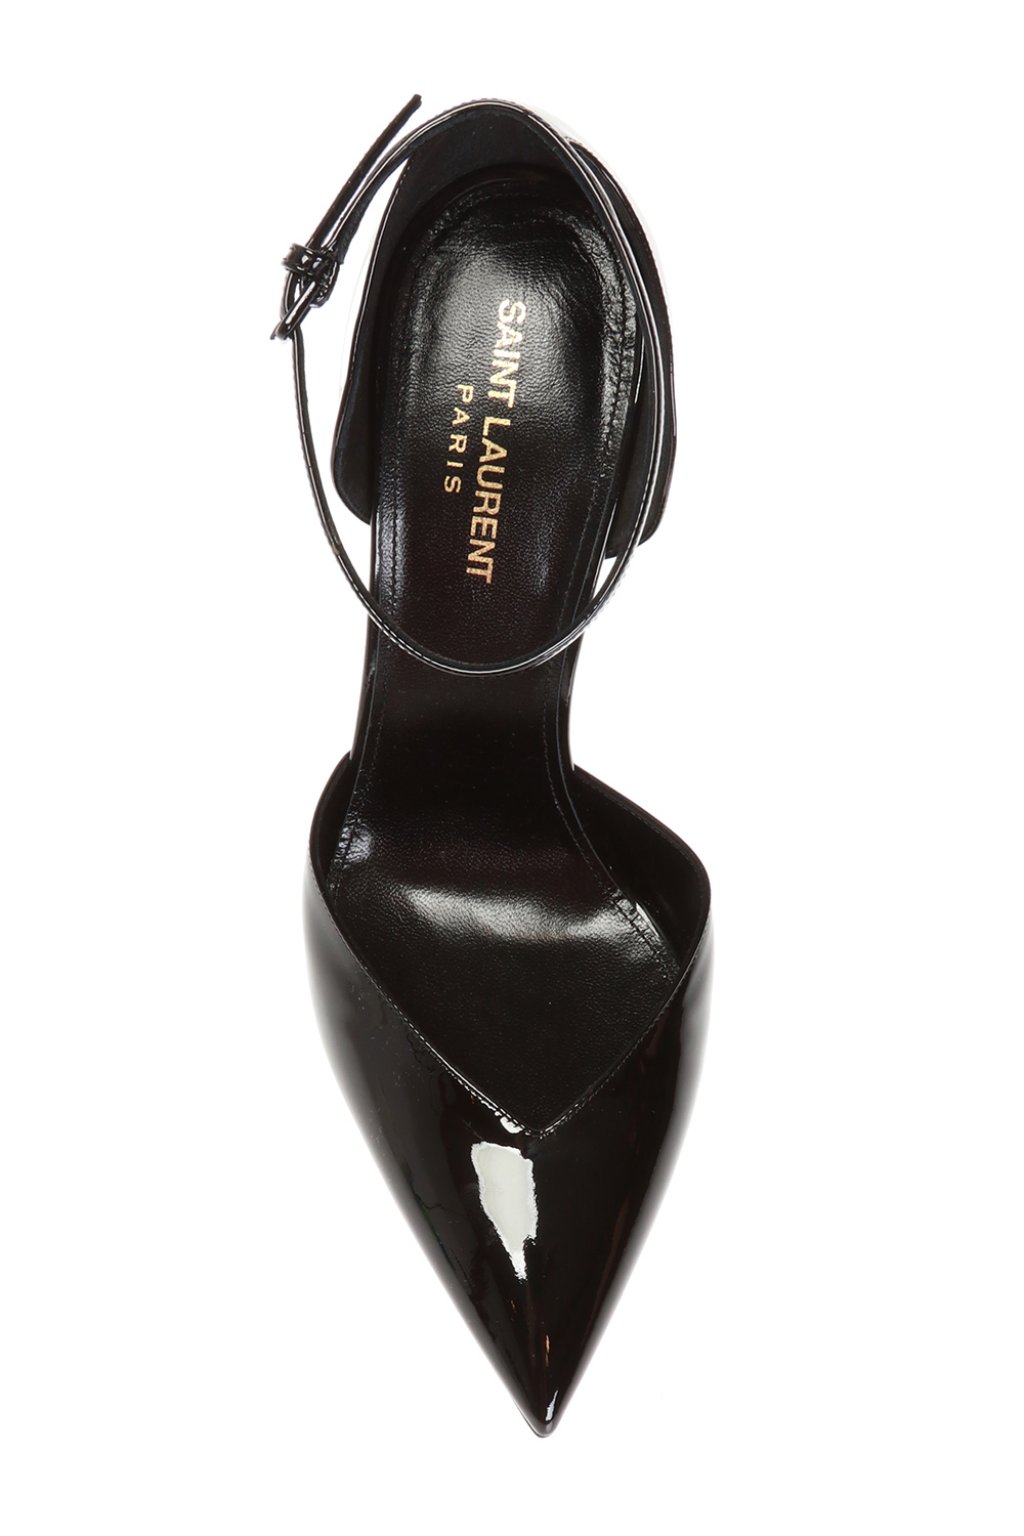 Leather High-heels Shoes Louis Vuitton - 39, buy pre-owned at 270 EUR